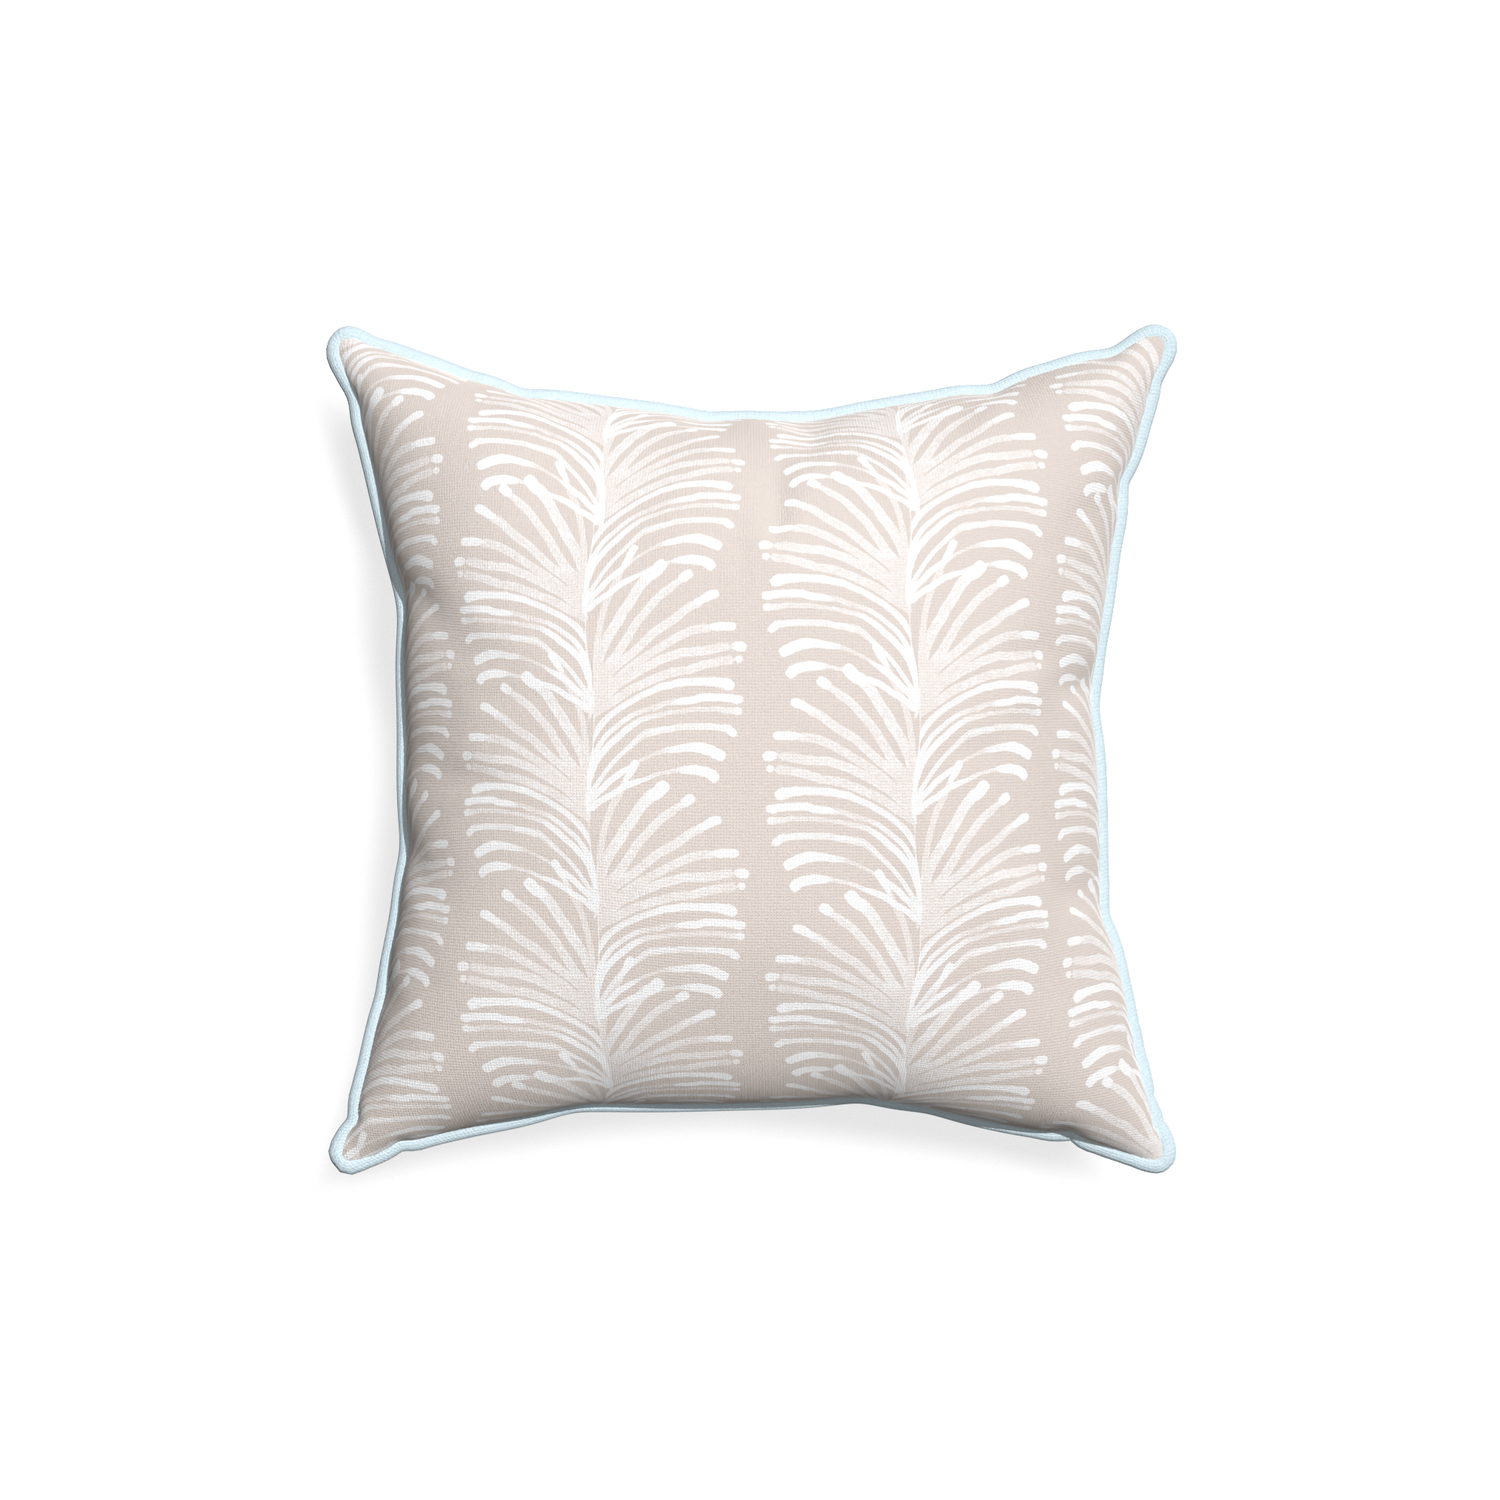 18-square emma sand custom pillow with powder piping on white background